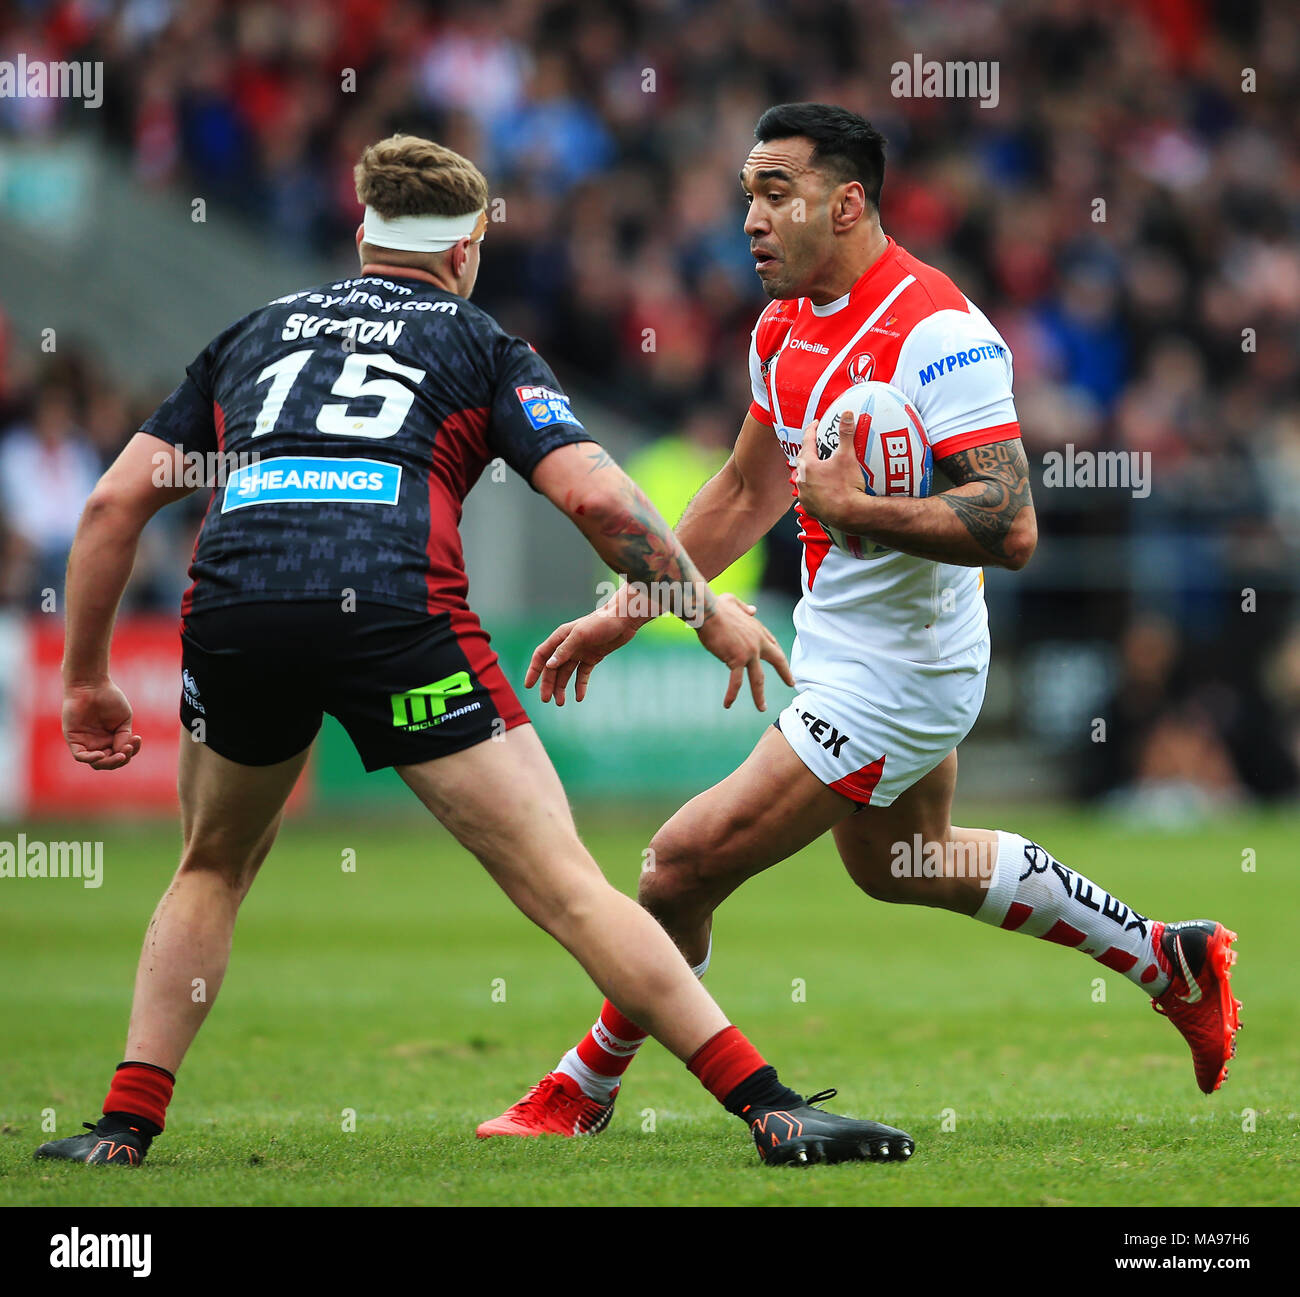 St Helens' Zeb Taia takes on Wigan Warriors' Ryan Sutton during the Super League match at the Totally Wicked Stadium, St Helens. PRESS ASSOCIATION Photo. Picture date: Friday March 30, 2018. See PA story RUGBYL St Helens. Photo credit should read: Matt McNulty/PA Wire. RESTRICTIONS: Editorial use only. No commercial use. No false commercial association. No video emulation. No manipulation of images. Stock Photo